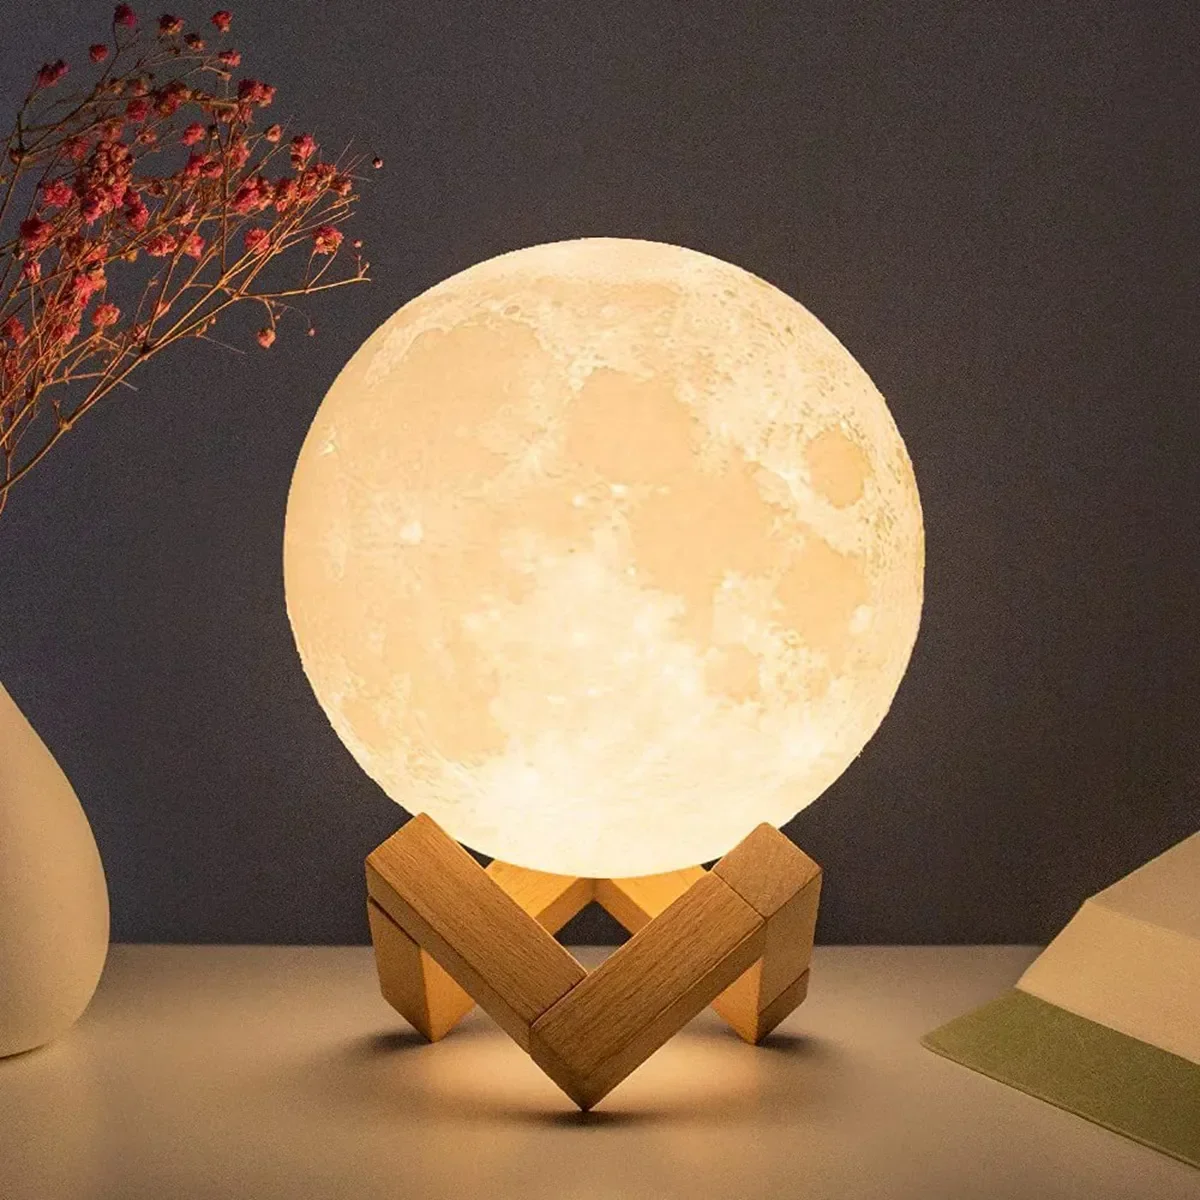 8cm Moon Lamp LED Night Light Battery Powered With Stand Starry Lamp Bed... - $7.93